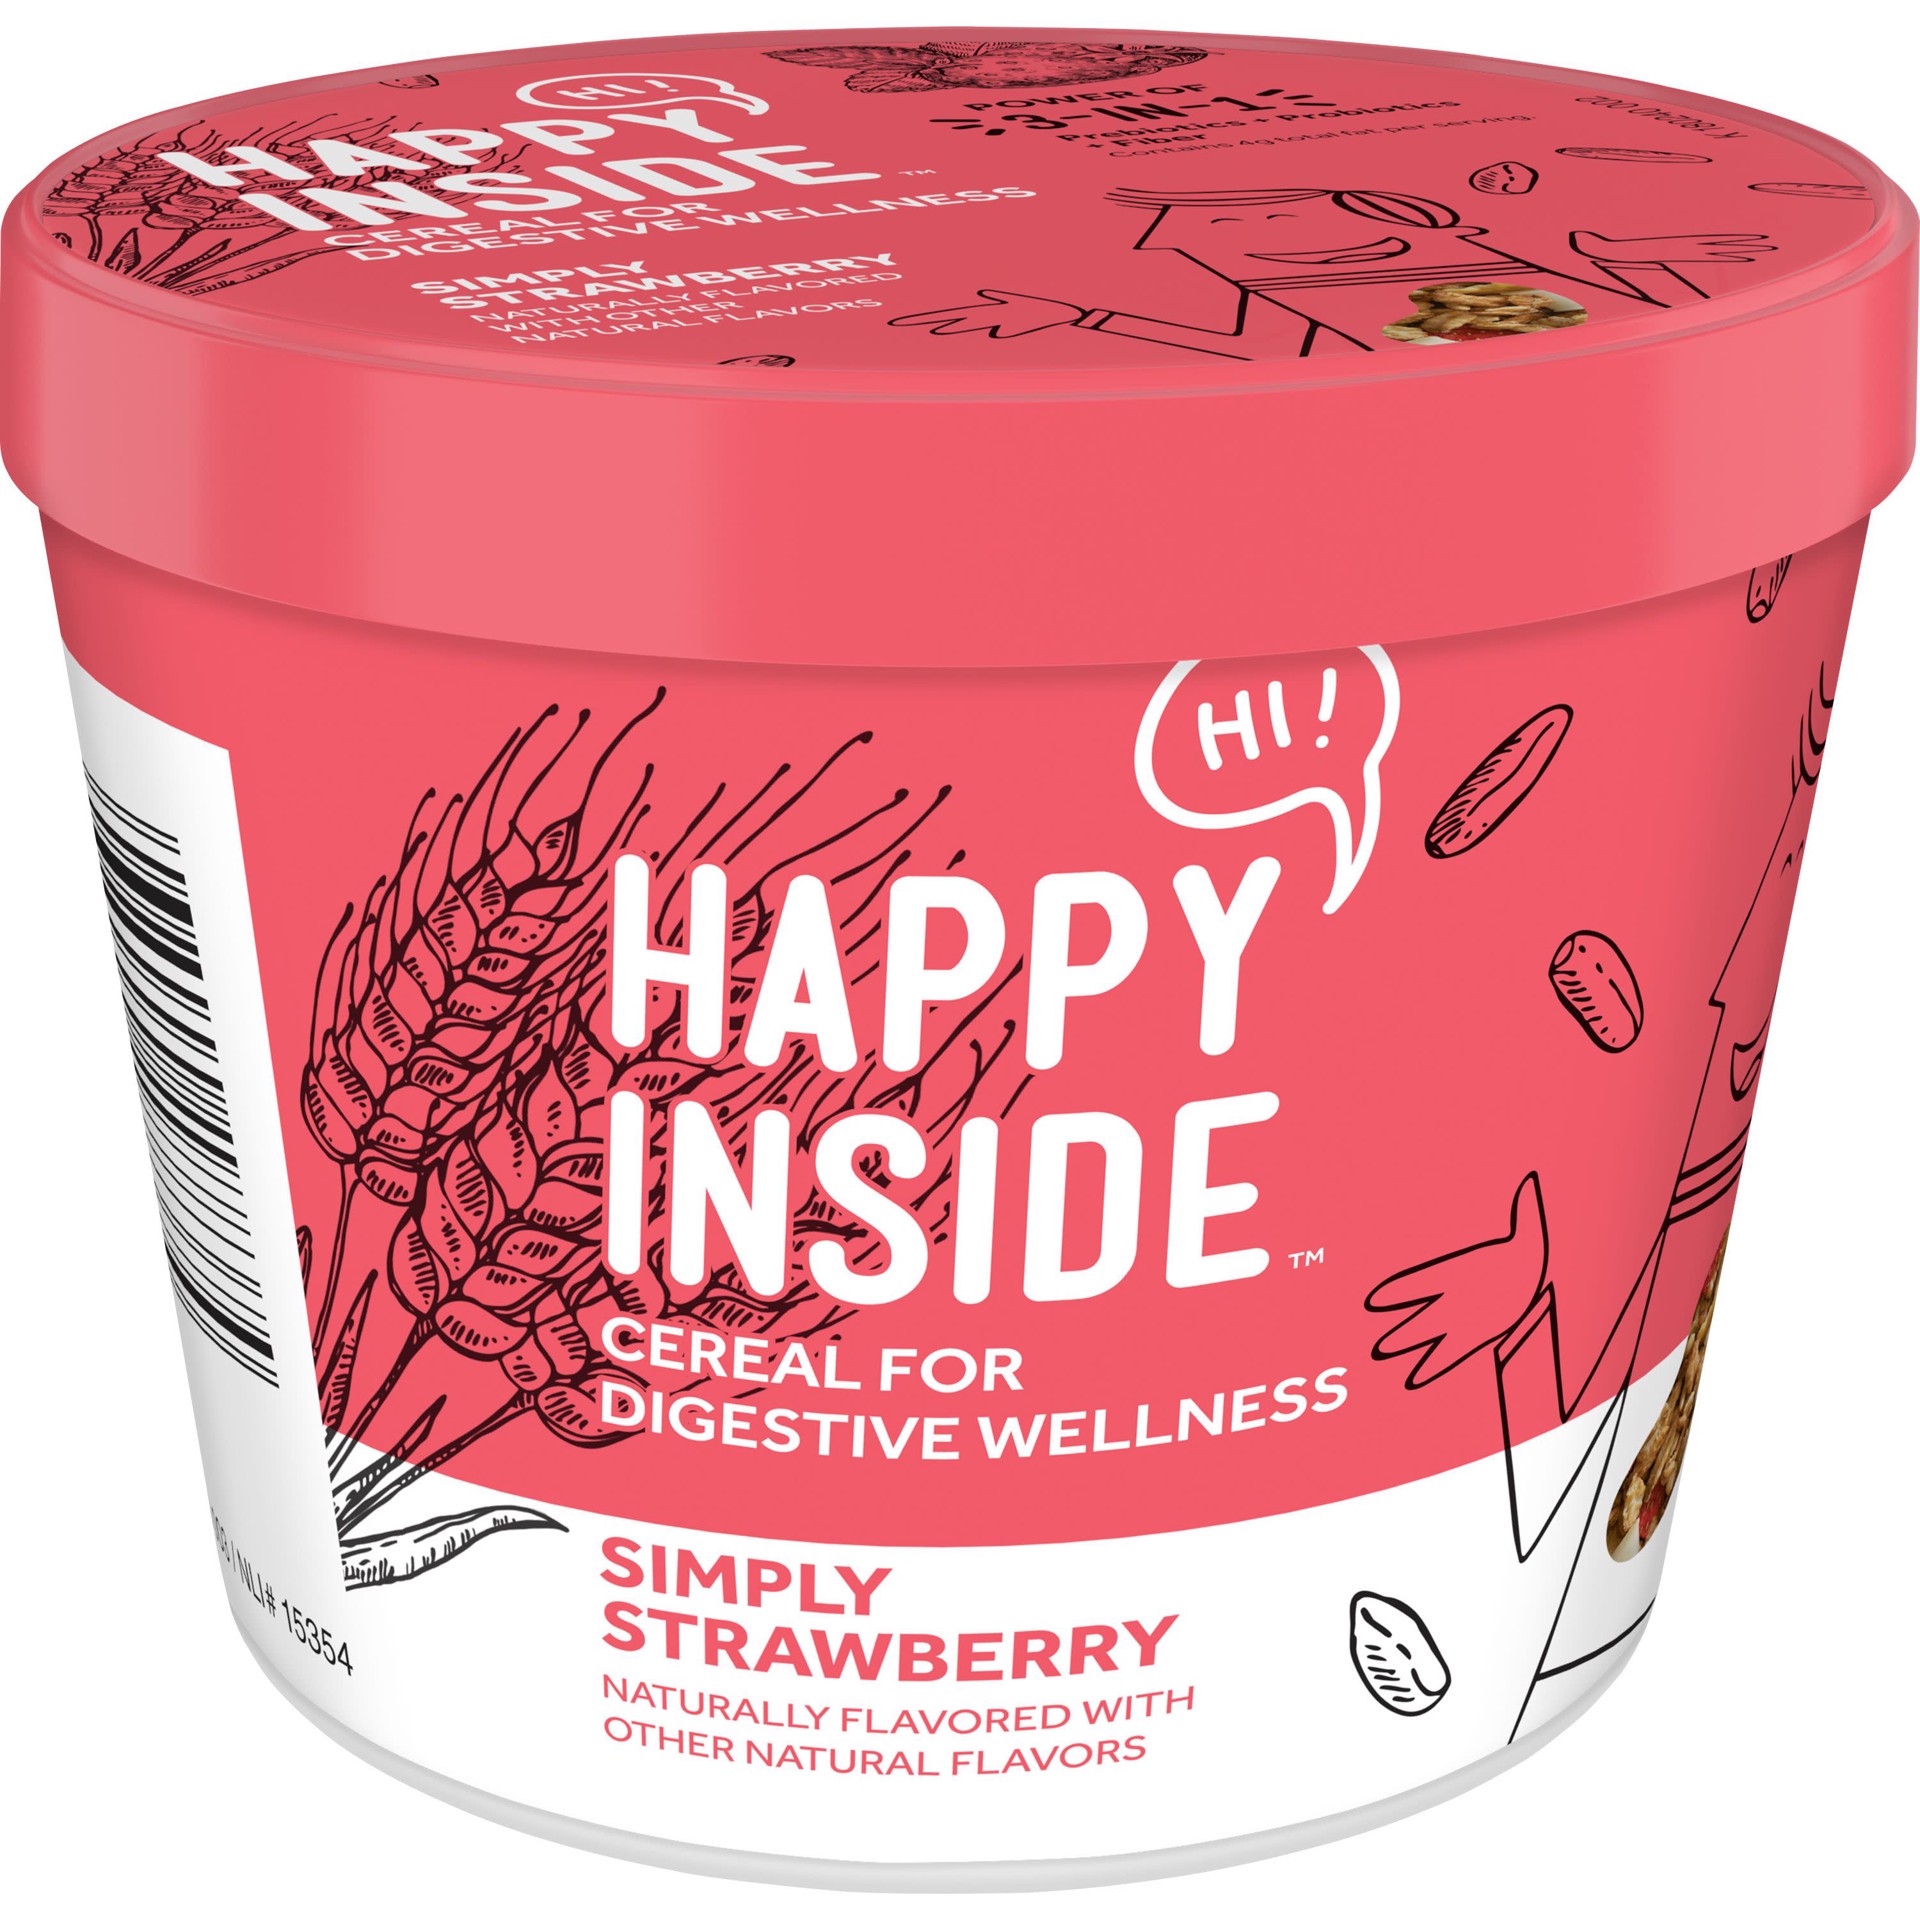 slide 1 of 5, HI! Happy Inside, Breakfast Cereal, Simply Strawberry, with Prebiotics, Probiotics and Fiber for Digestive Wellness, Non-GMO, 1.94oz Cup, 1.94 oz